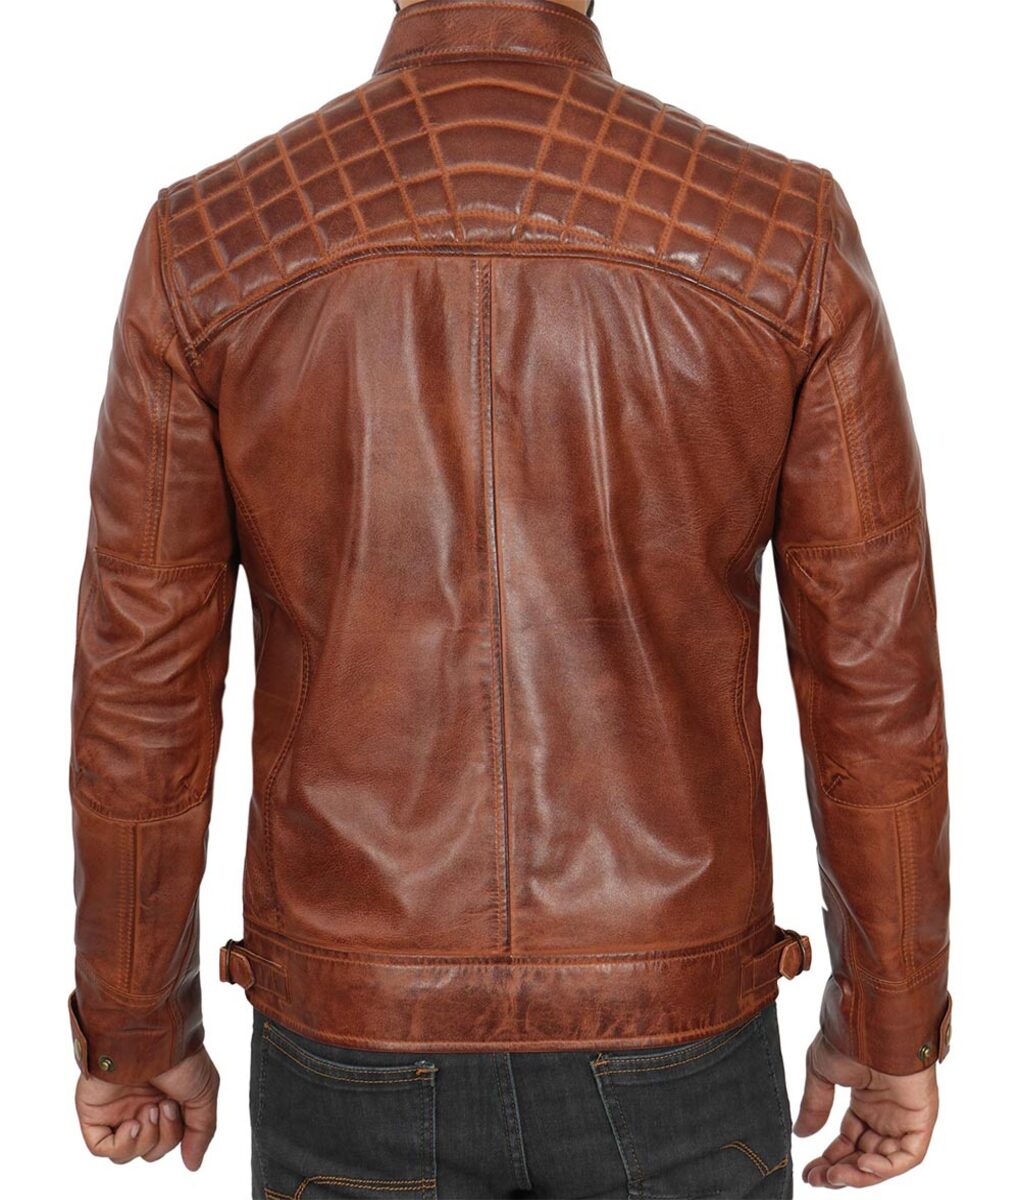 Mens_Cafe_Racer_Cognac_Brown_Wax_Leather_Jacket